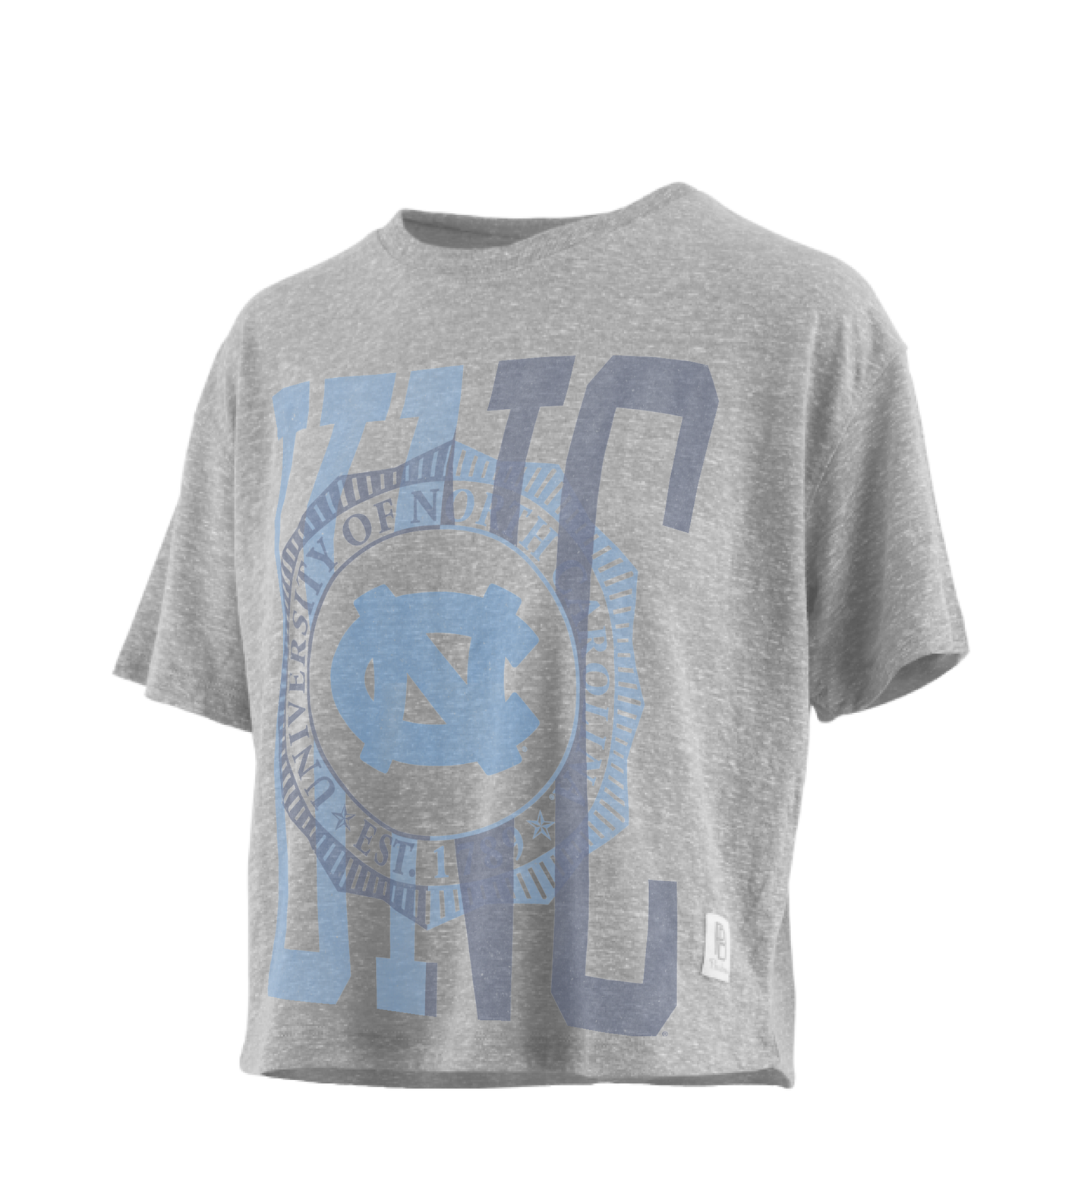 UNC Chapel Hill Cropped T-Shirt with Seal in Grey